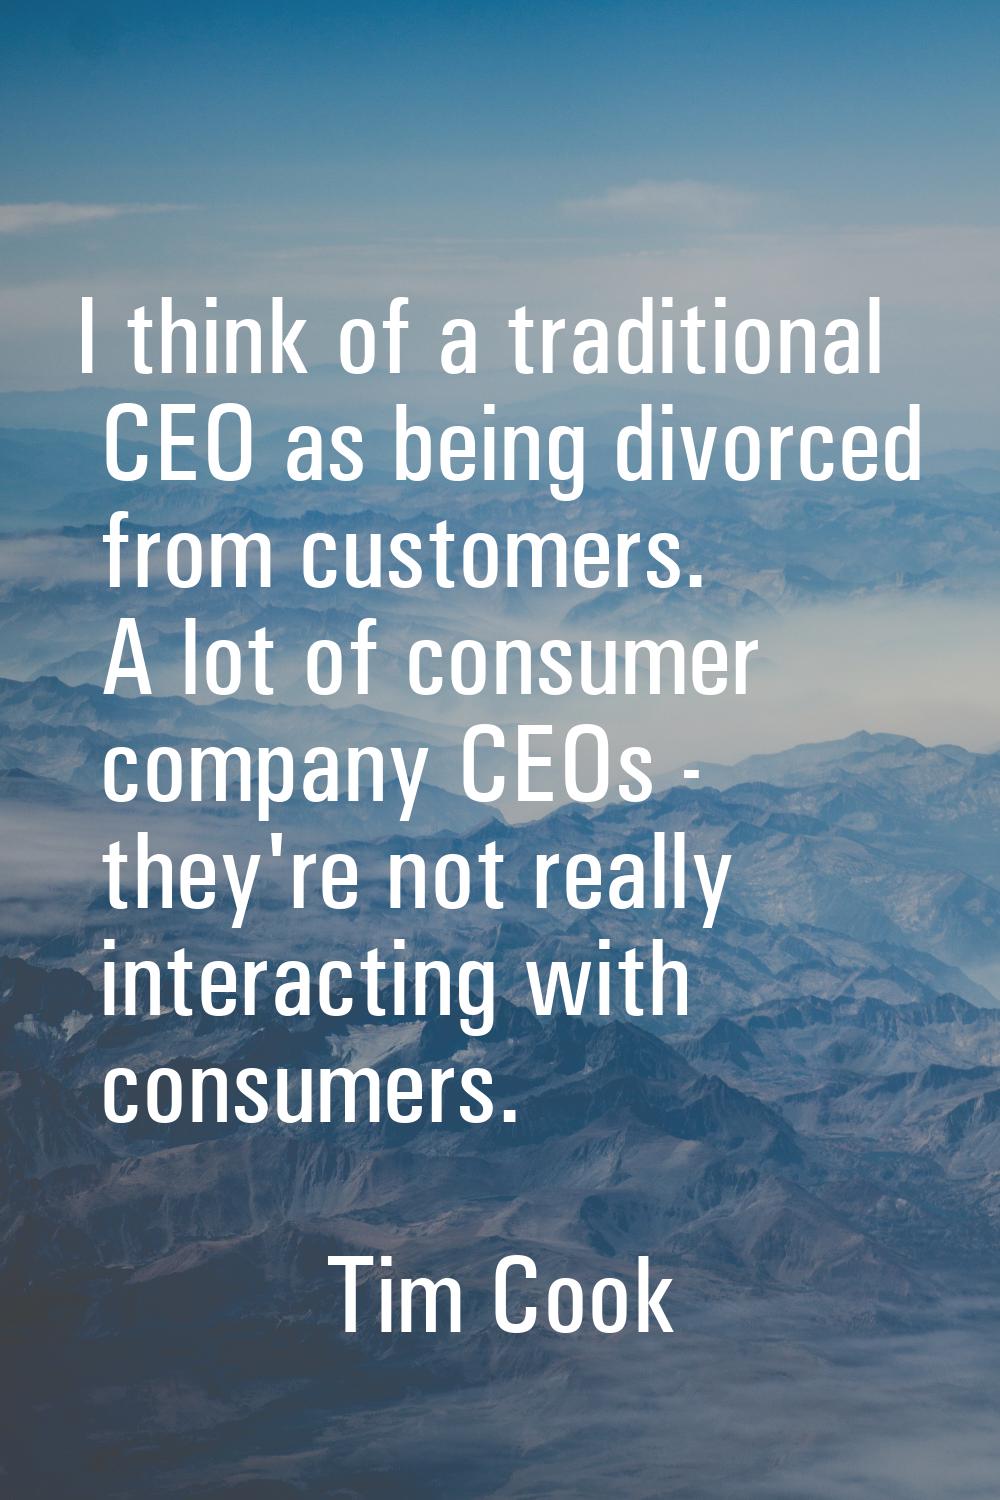 I think of a traditional CEO as being divorced from customers. A lot of consumer company CEOs - the